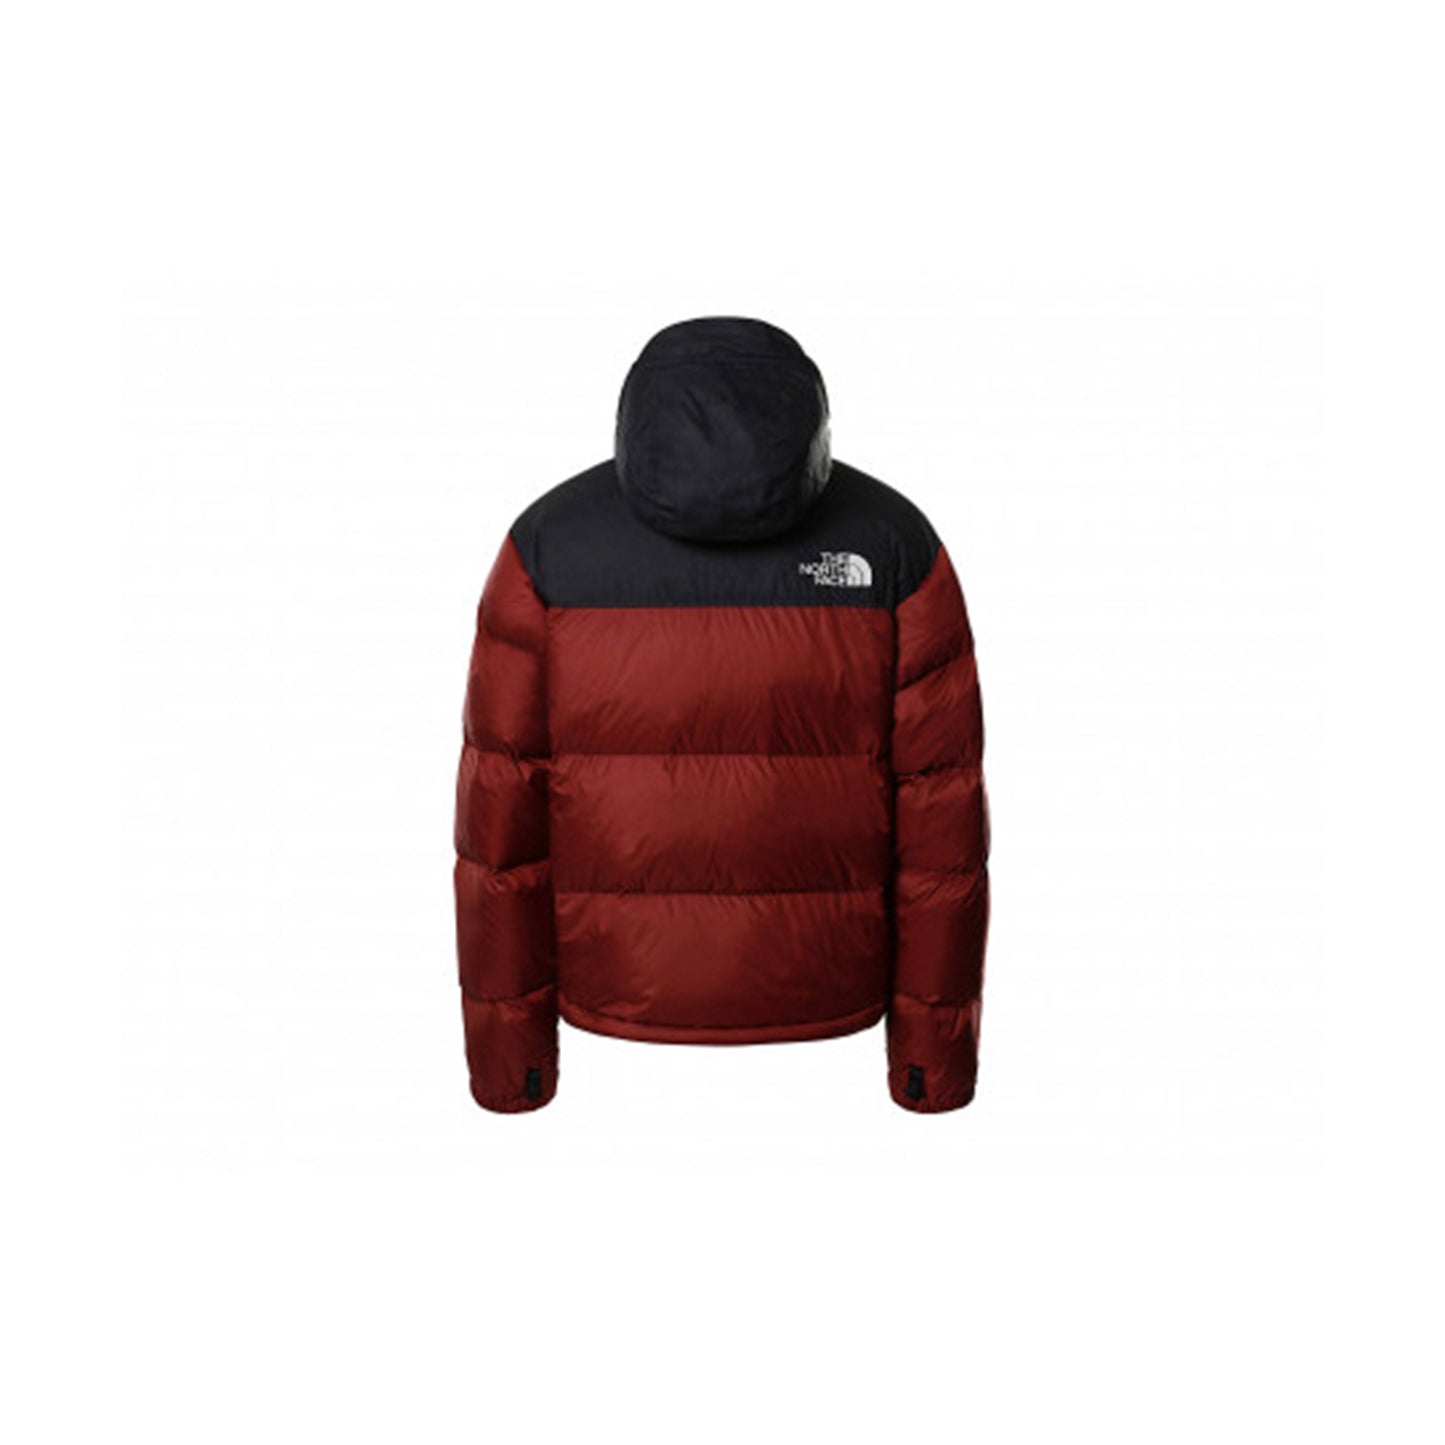 The North Face 1996 Retro Nuptse 700 Fill Packable Jacket "Brick House Red"